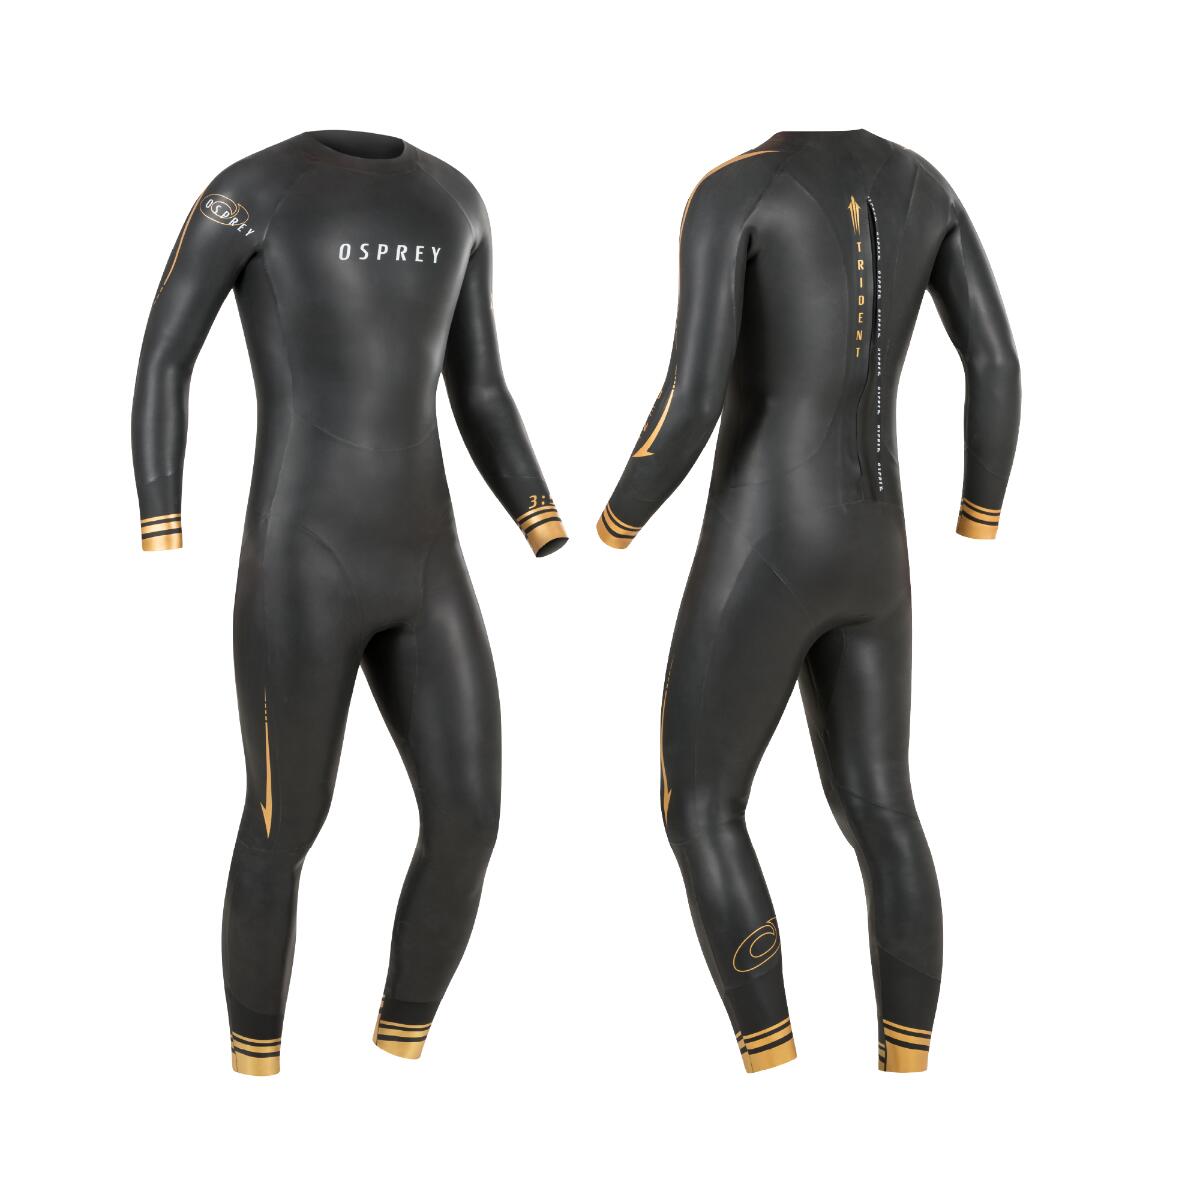 OSPREY ACTION SPORTS Osprey Men's Trident Tri-Suit 3mm Open Water Full Length Wetsuit